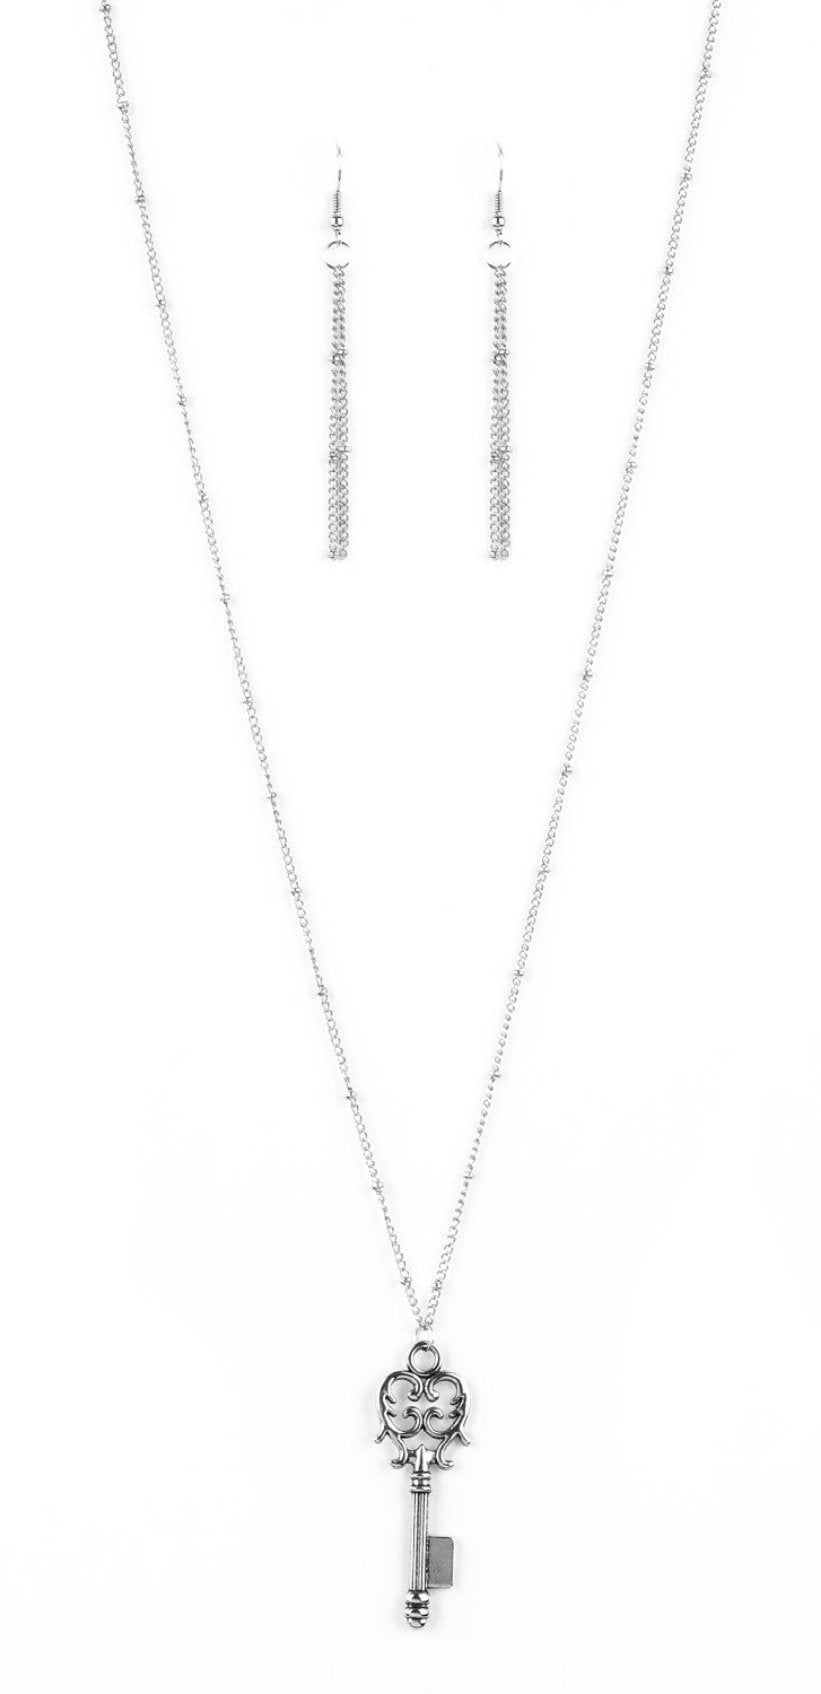 The Magic Key Silver Necklace and Earrings